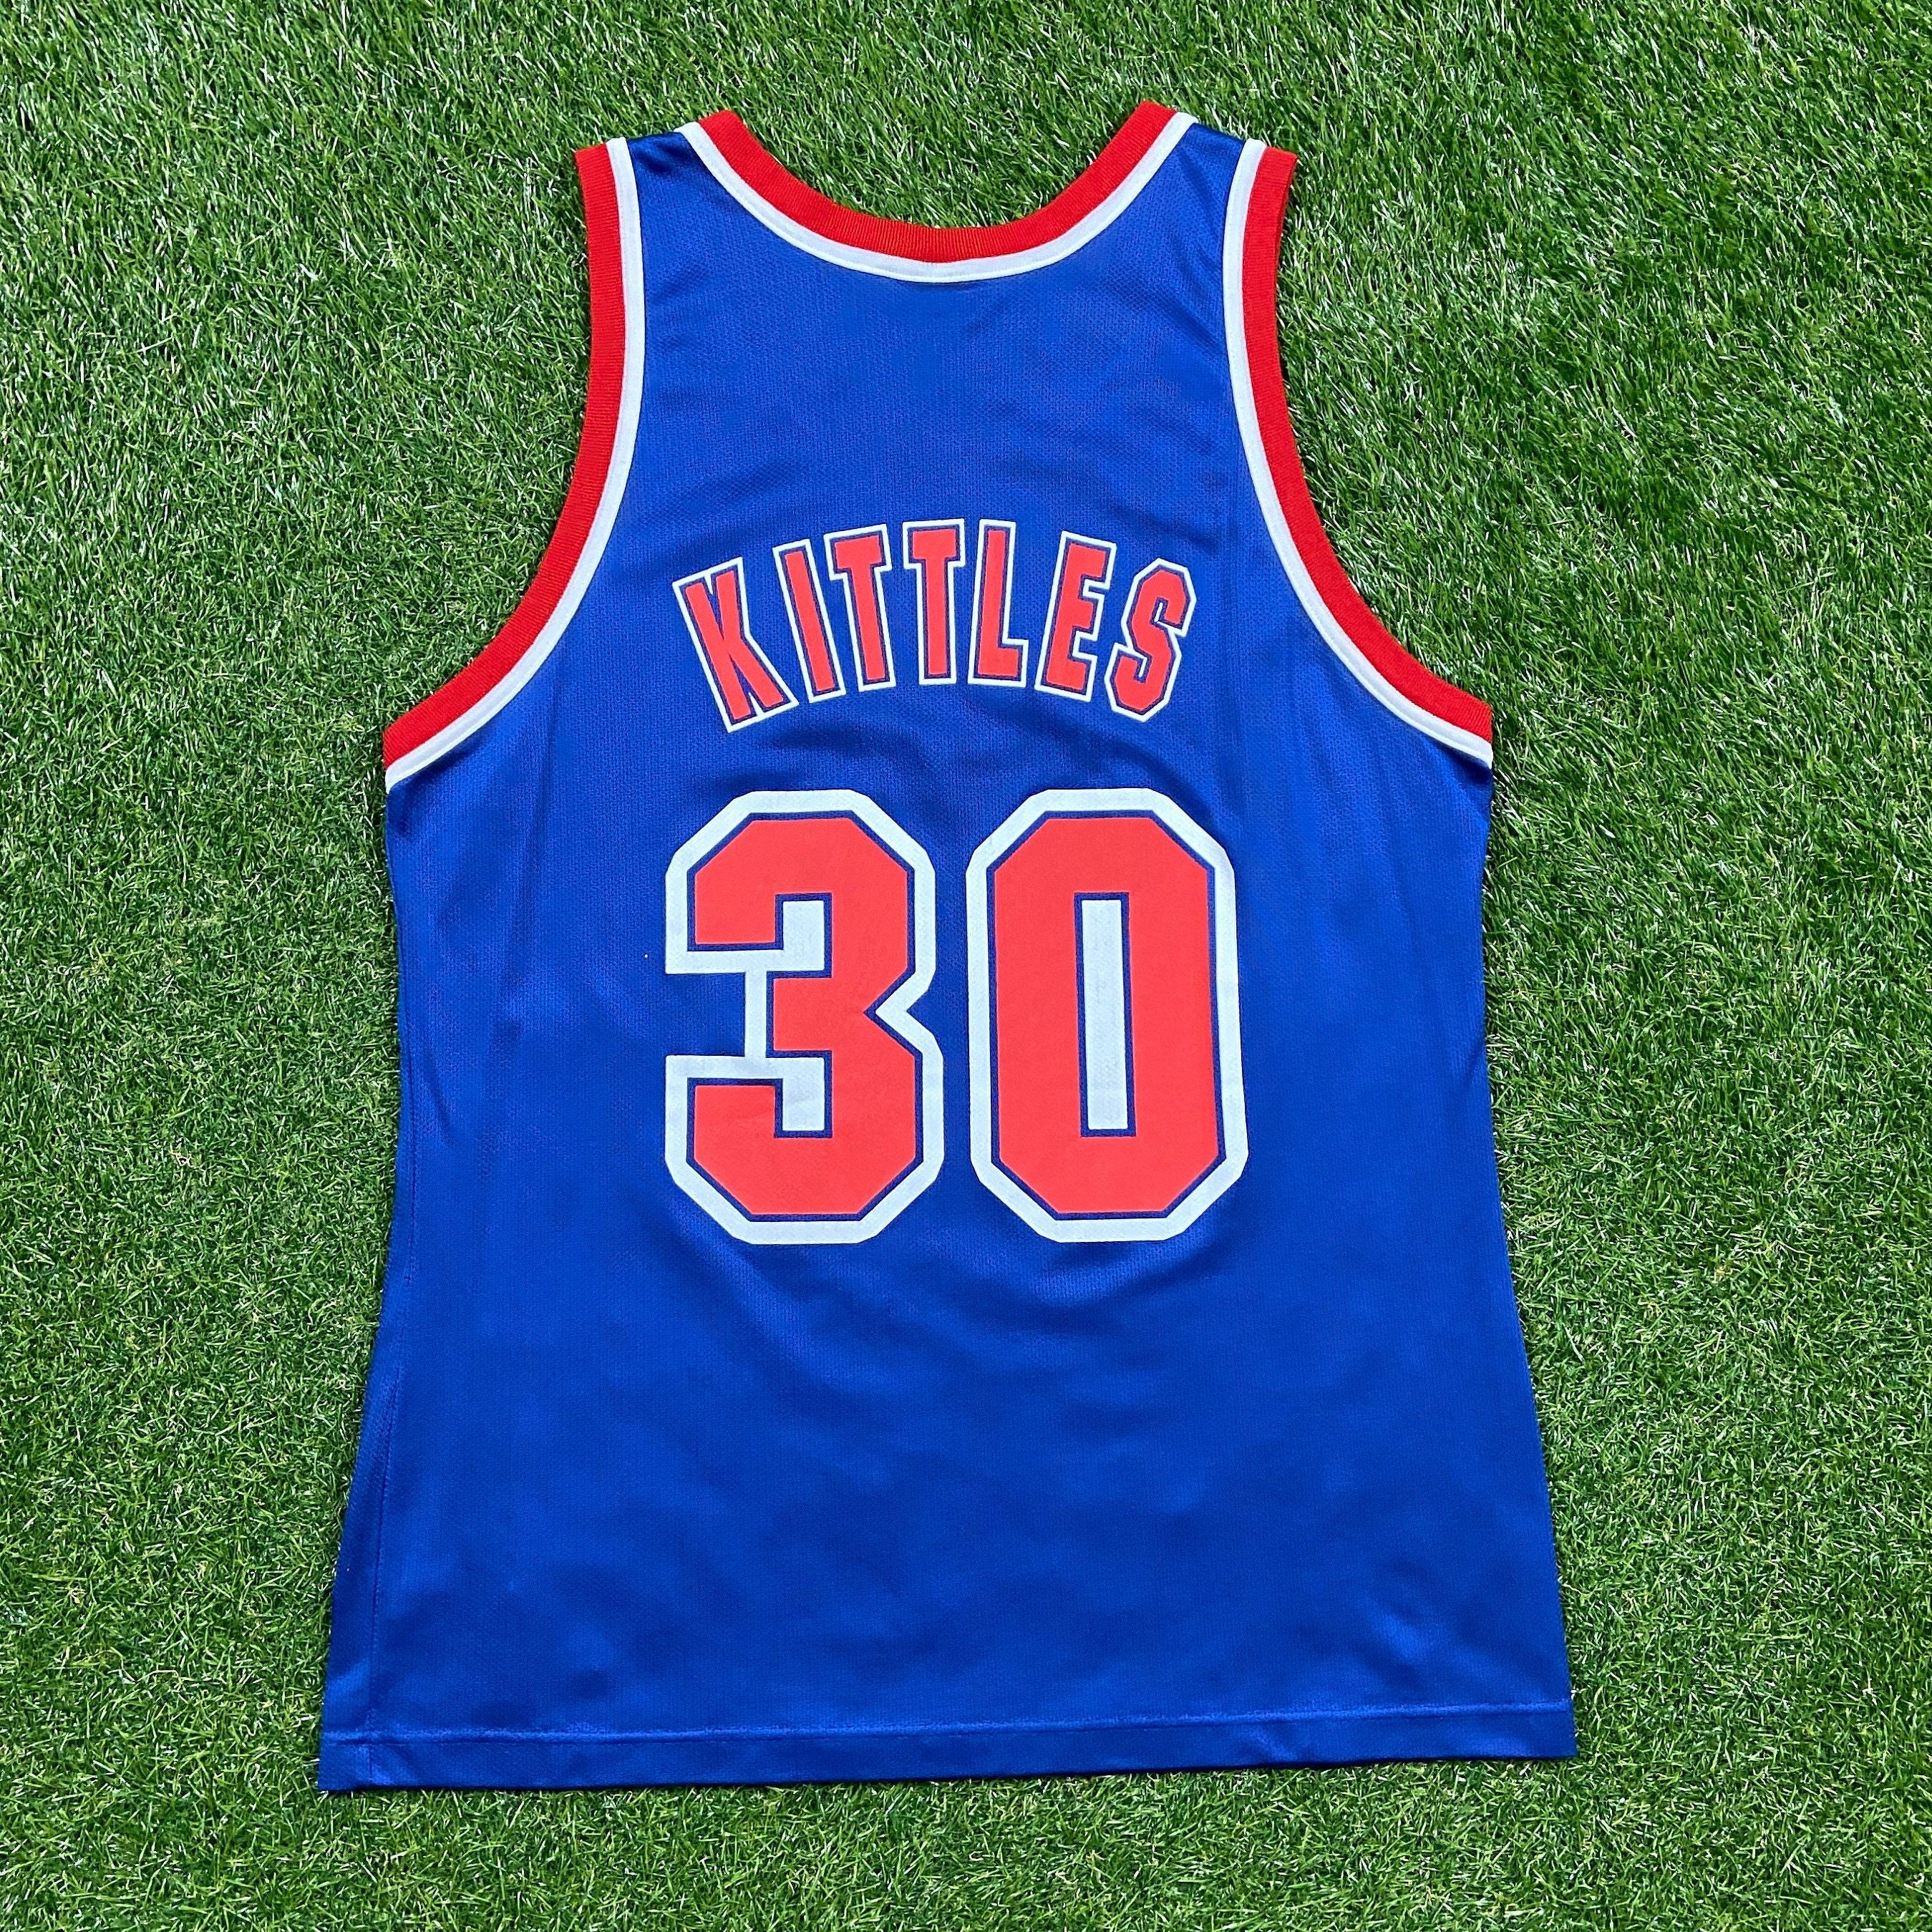 Kerry Kittles Jersey for sale